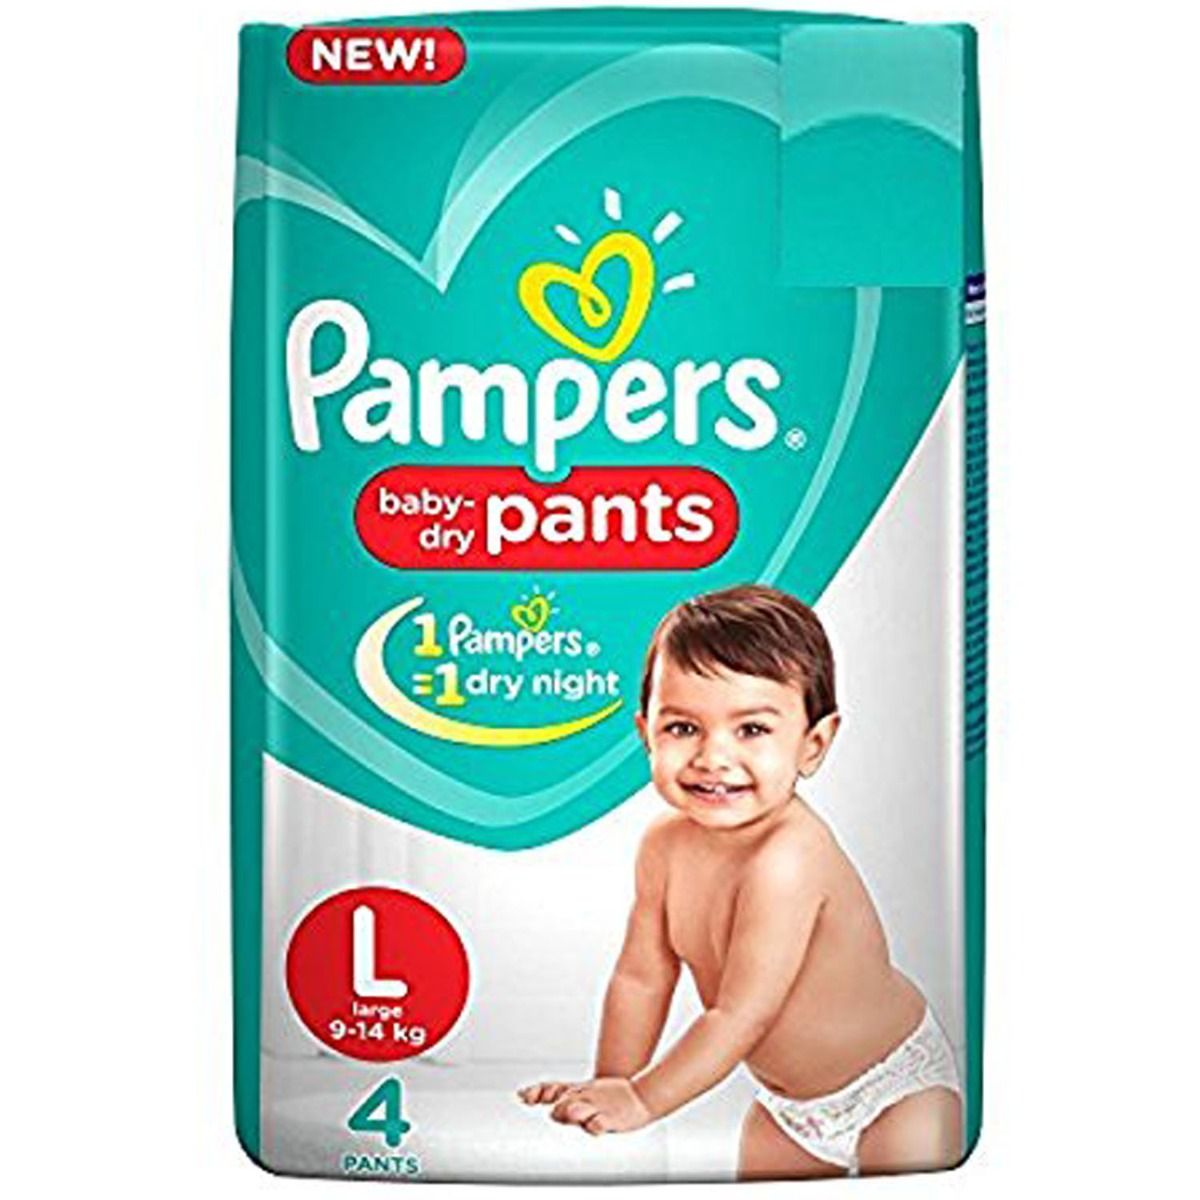 Pampers Baby-Dry Diaper Pants Large, 4 Count, Pack of 1 